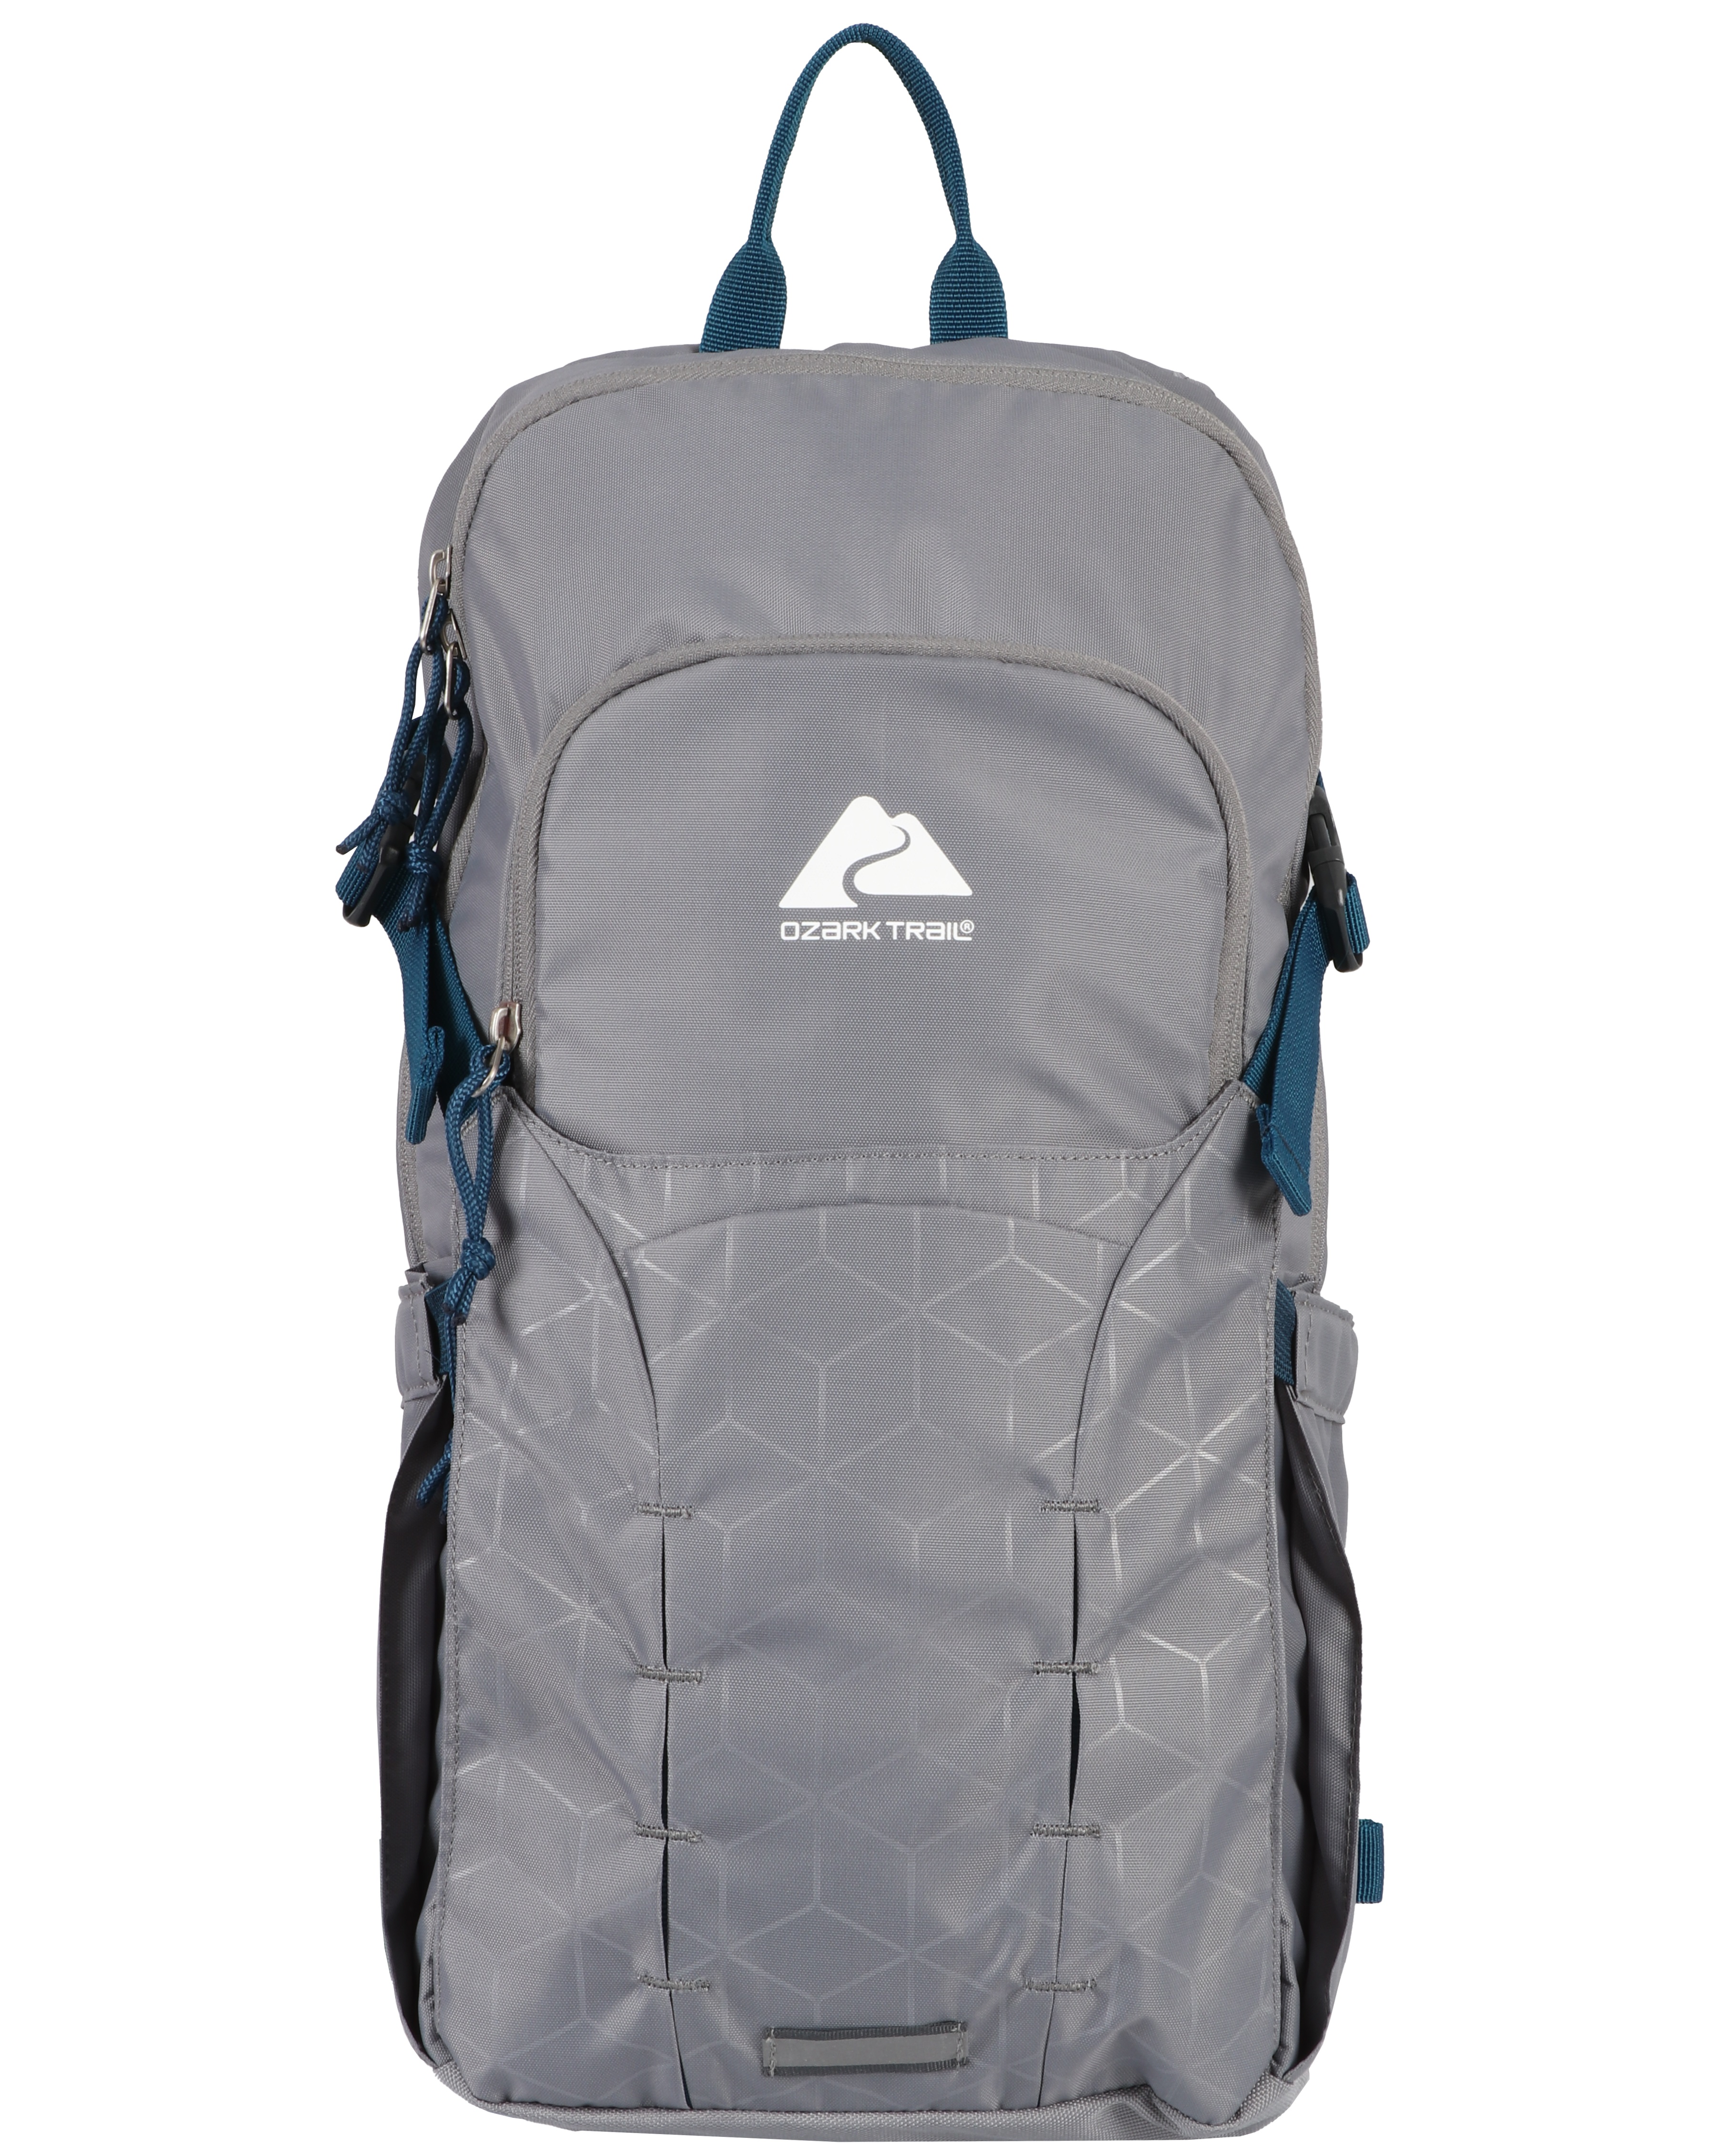 Ozark Trail 14 Ltr Hydration Pack, with Water Reservoir, Grey Polyester - image 3 of 10